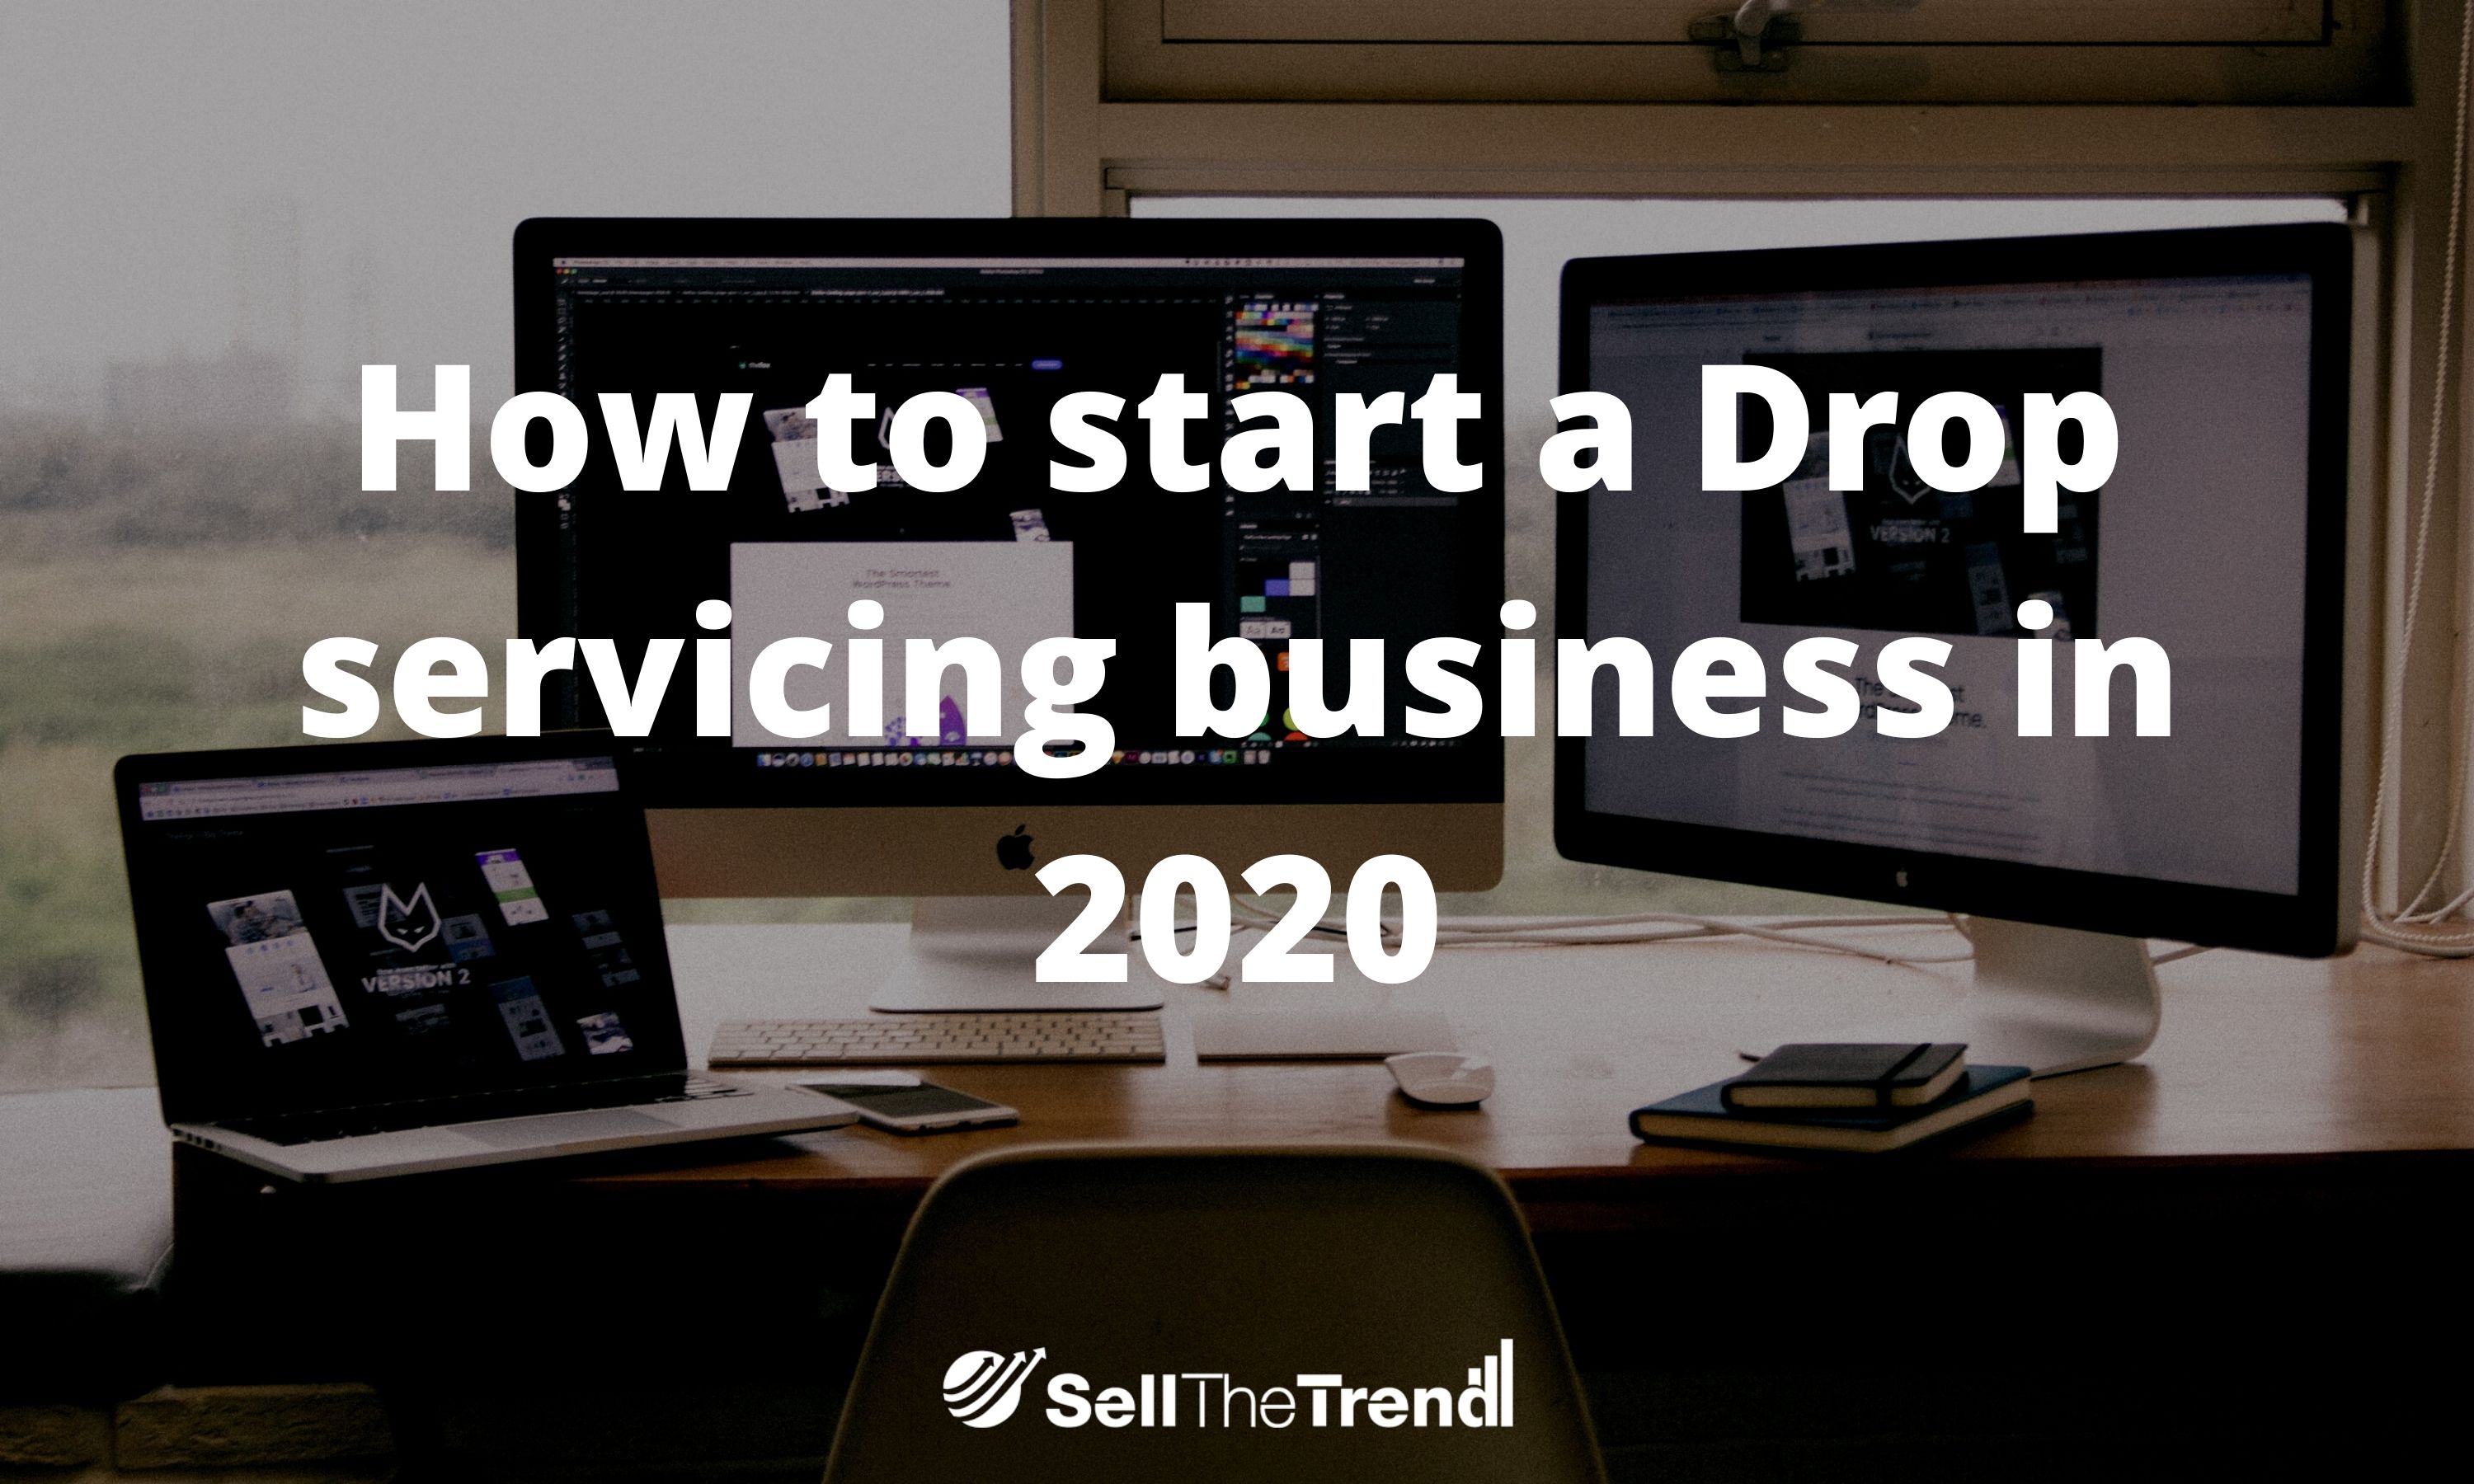 How to start a Drop servicing business in 2020